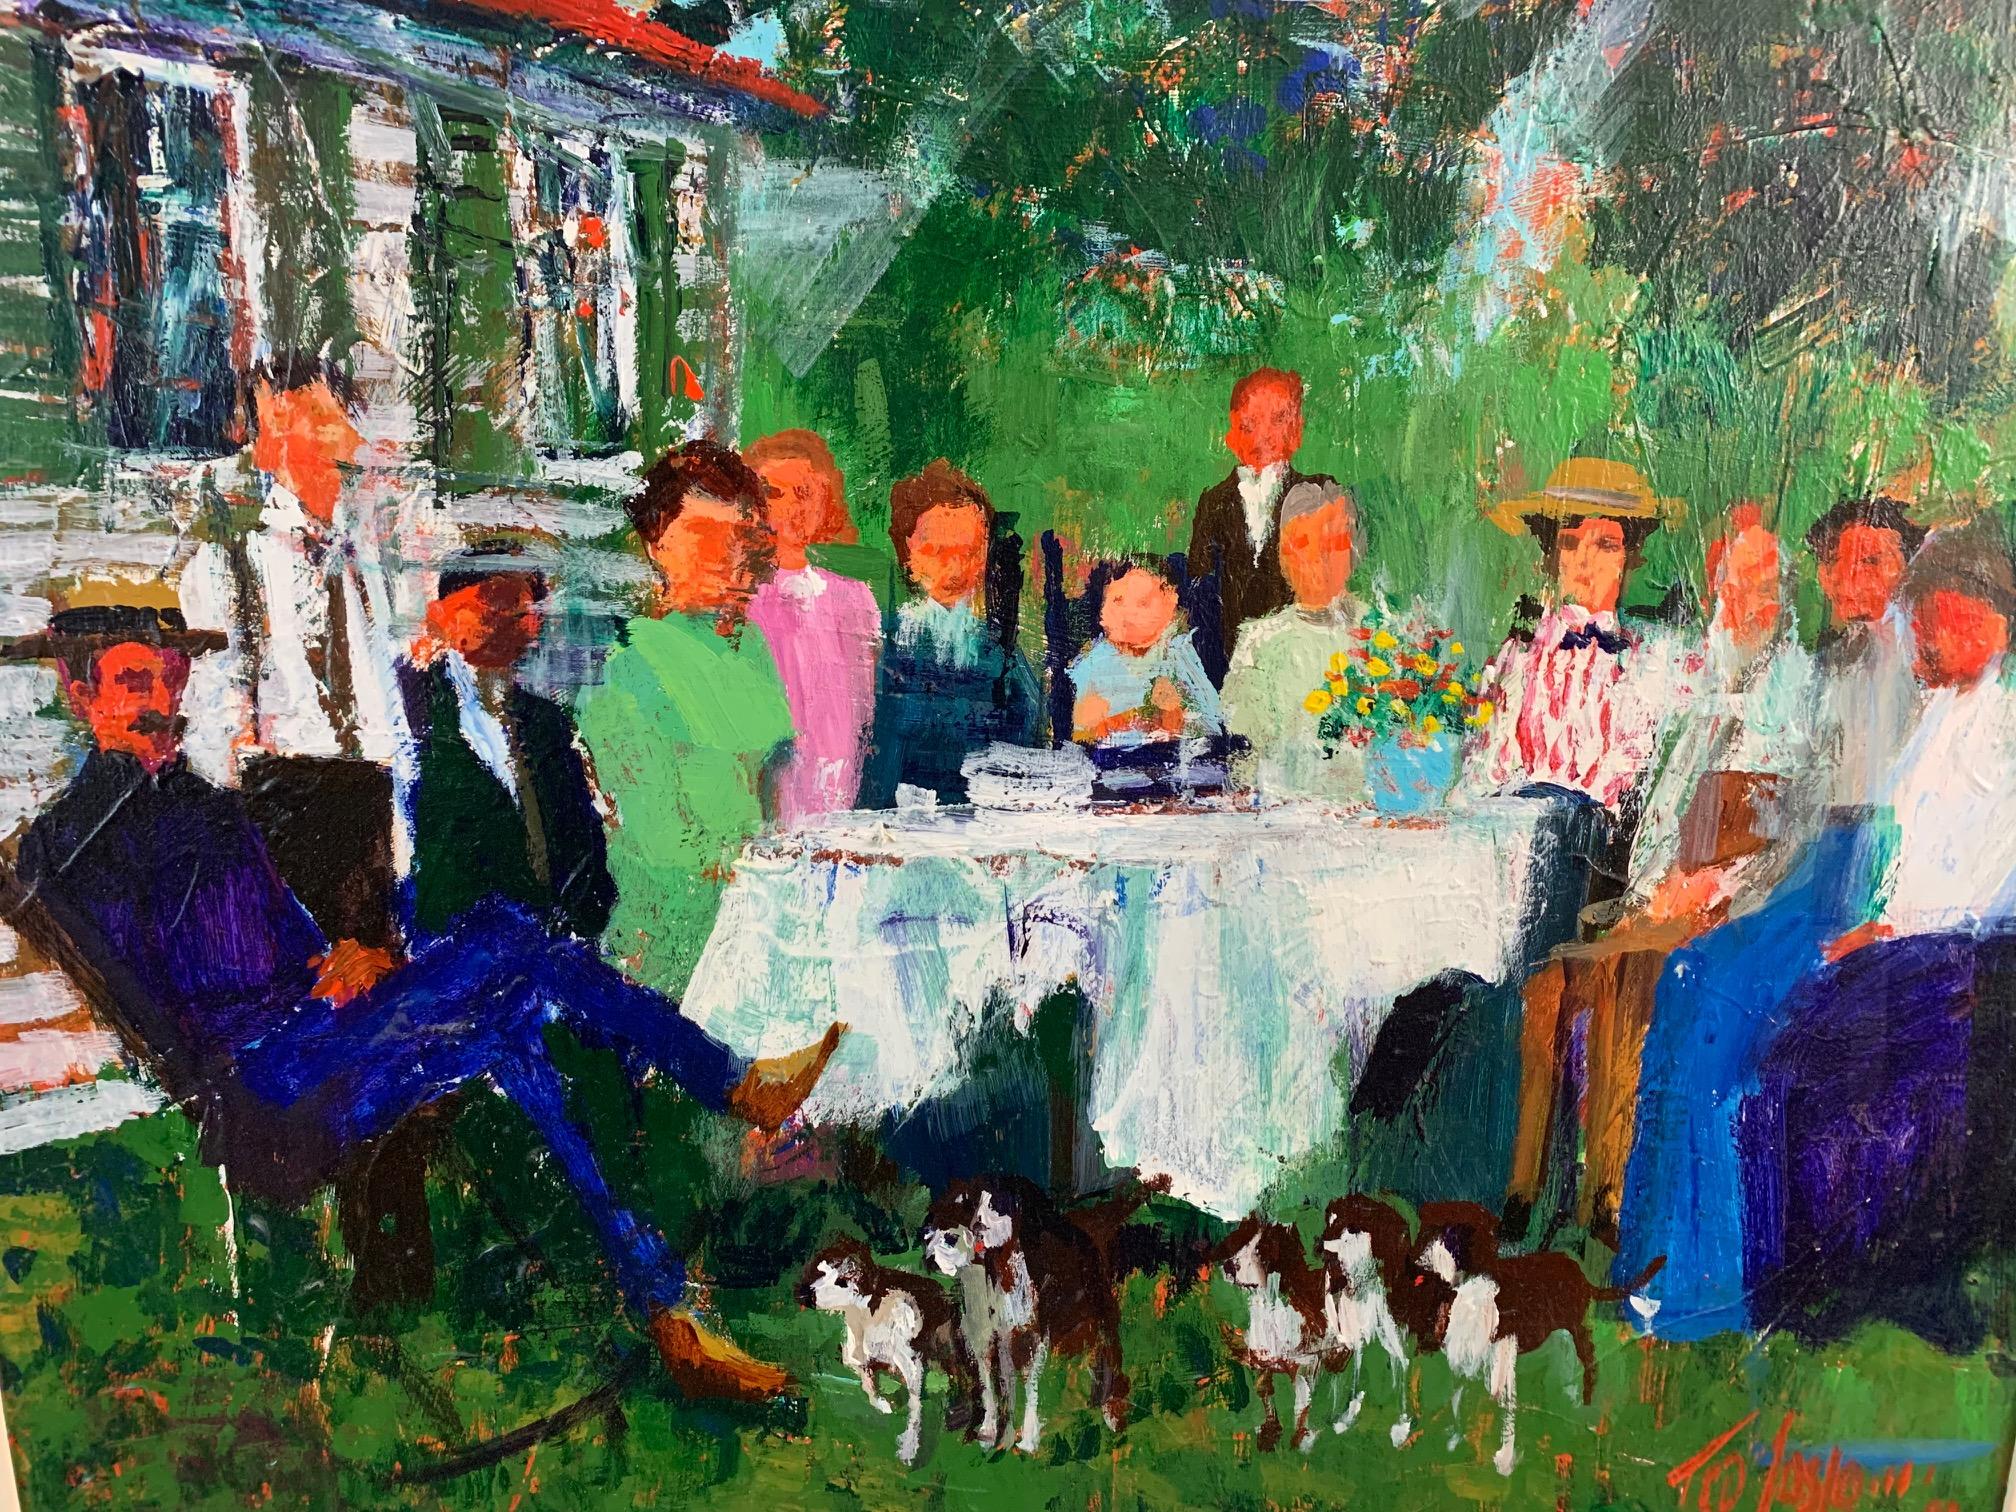 A lively and painterly rendering of a family gathering at an outdoor dining table in the country having marvelous impasto texture and sketchy impressionistic style. Titled 